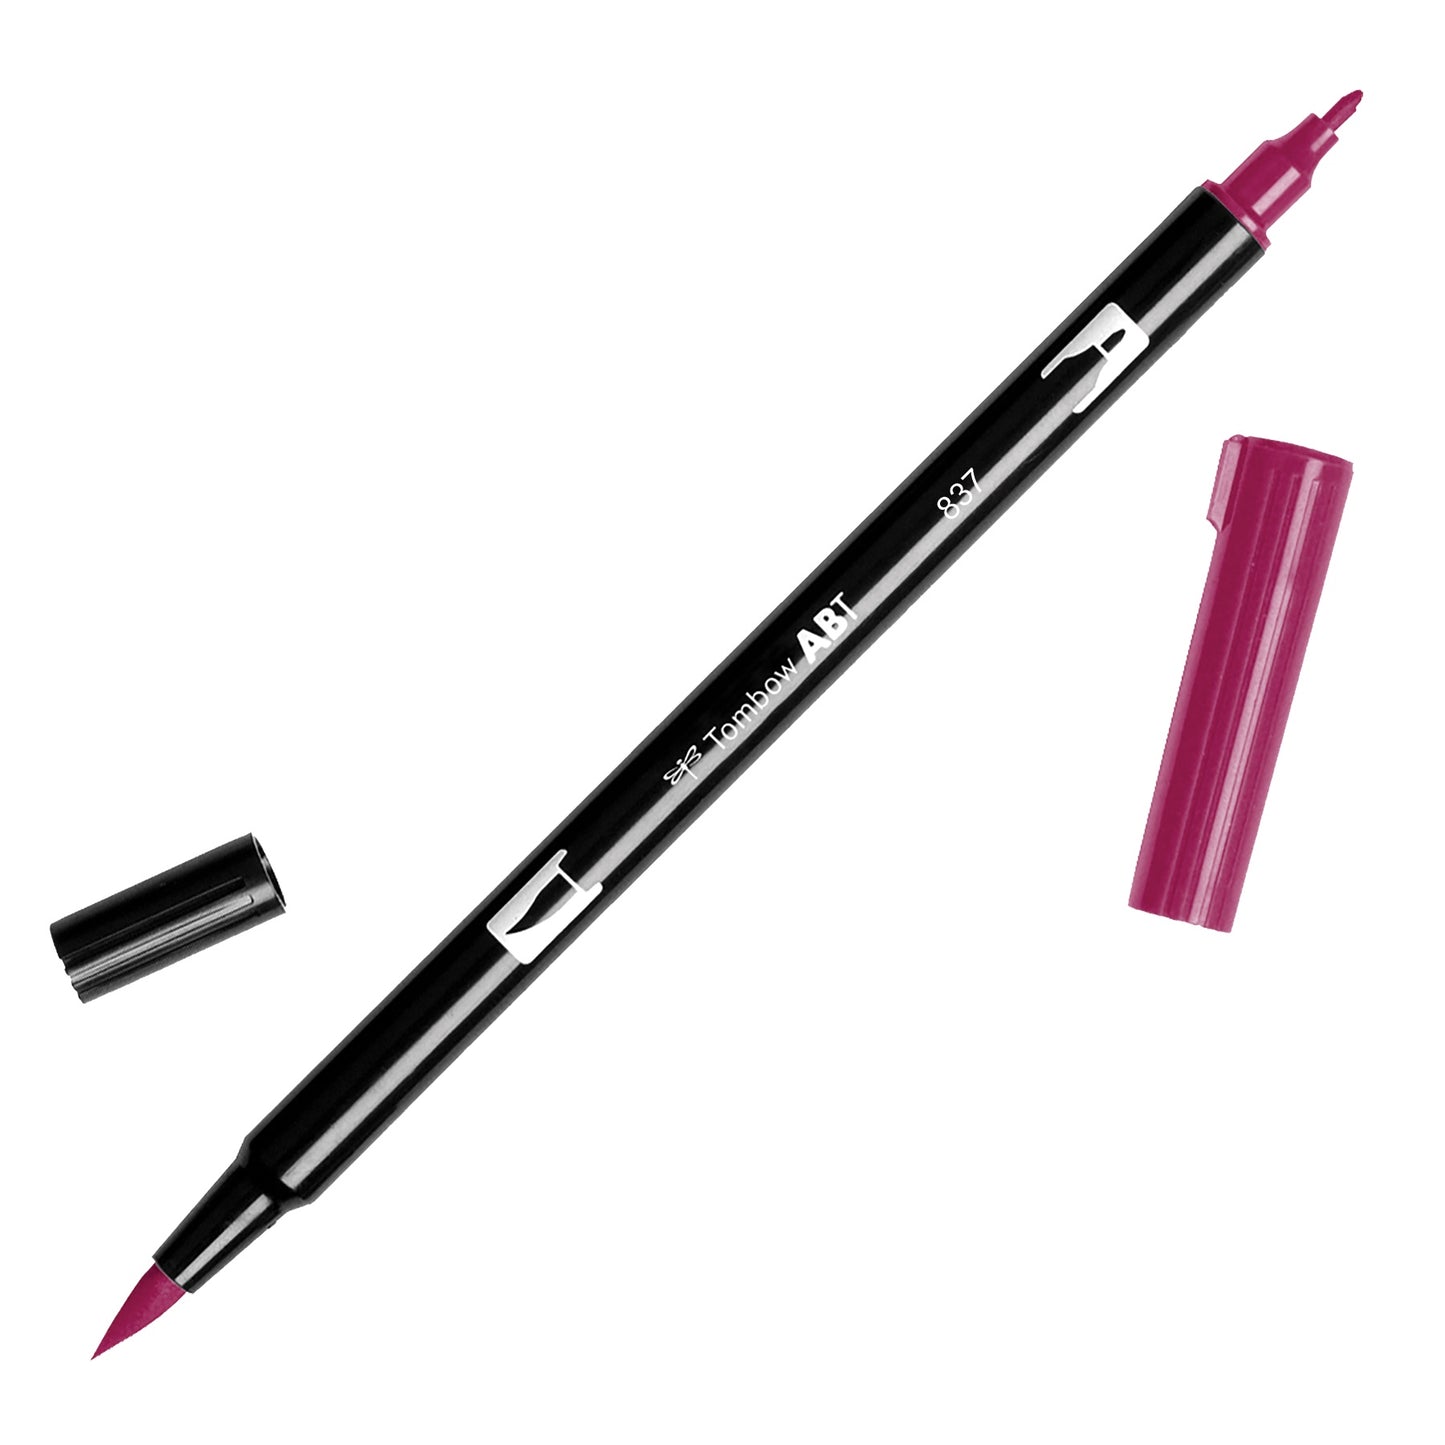 TOMBOW 837 WINE RED DUAL BRUSH MARKER